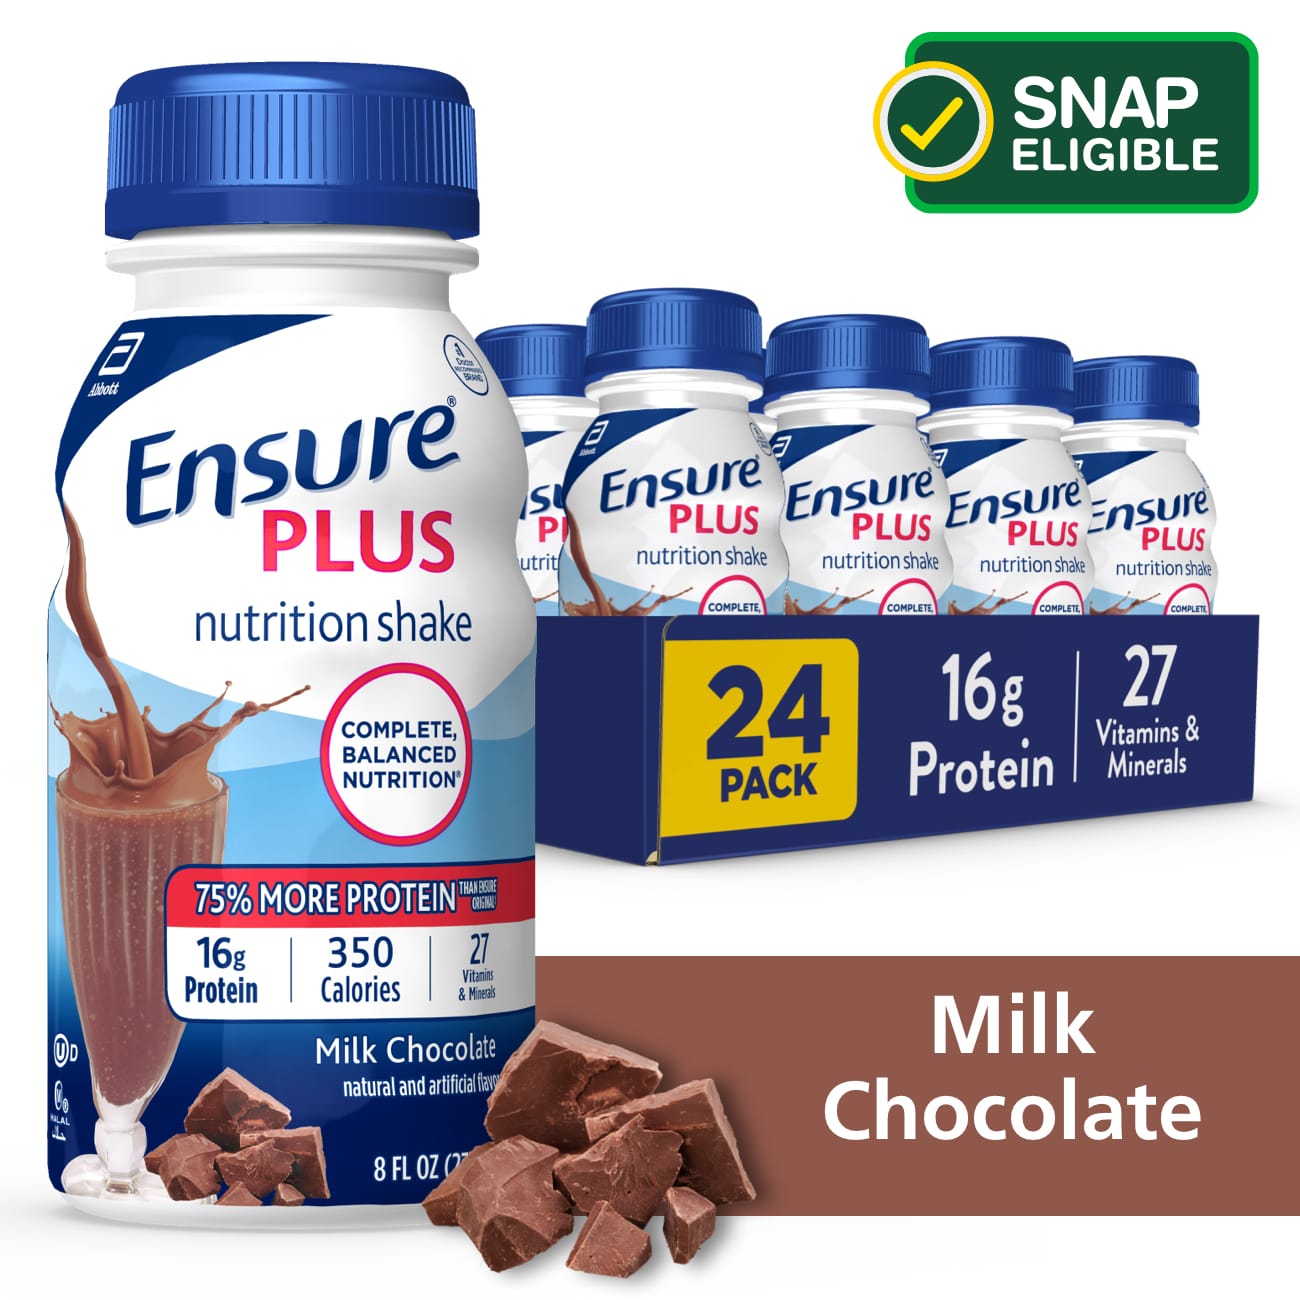 Ensure Plus Meal Replacement Nutrition Shake, Milk Chocolate, 8 fl oz, 24 Count - image 1 of 14